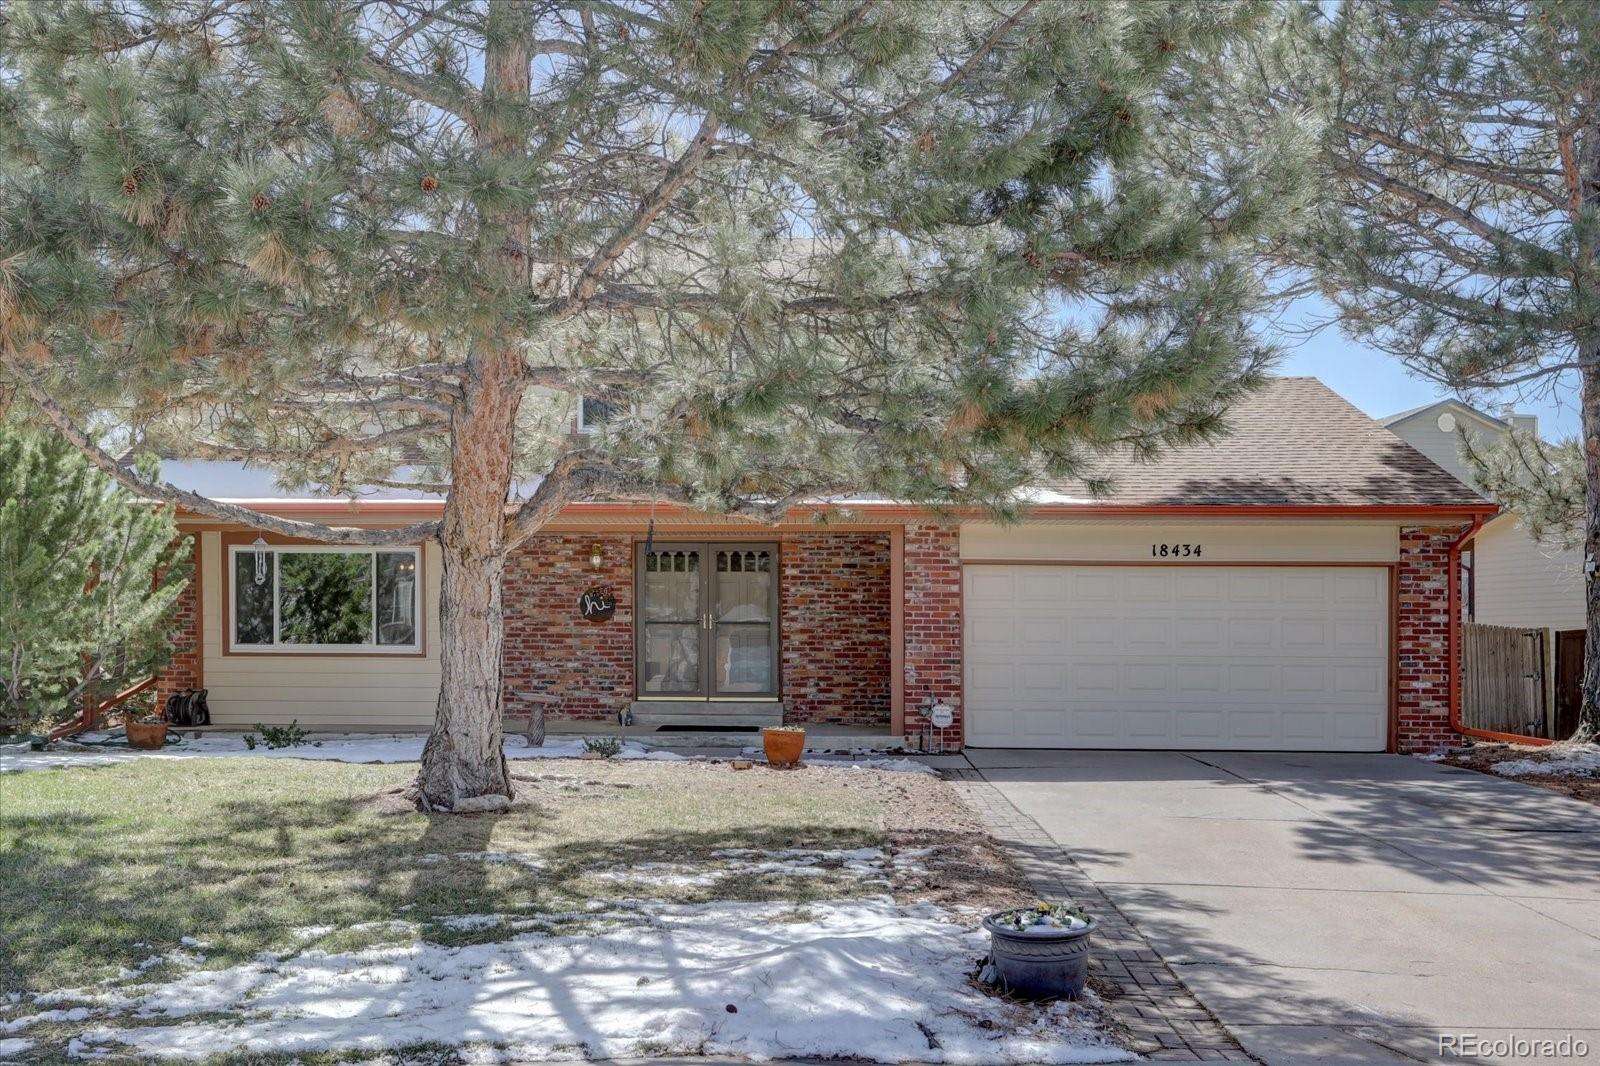 18434 e belleview lane, Centennial sold home. Closed on 2024-04-24 for $560,000.